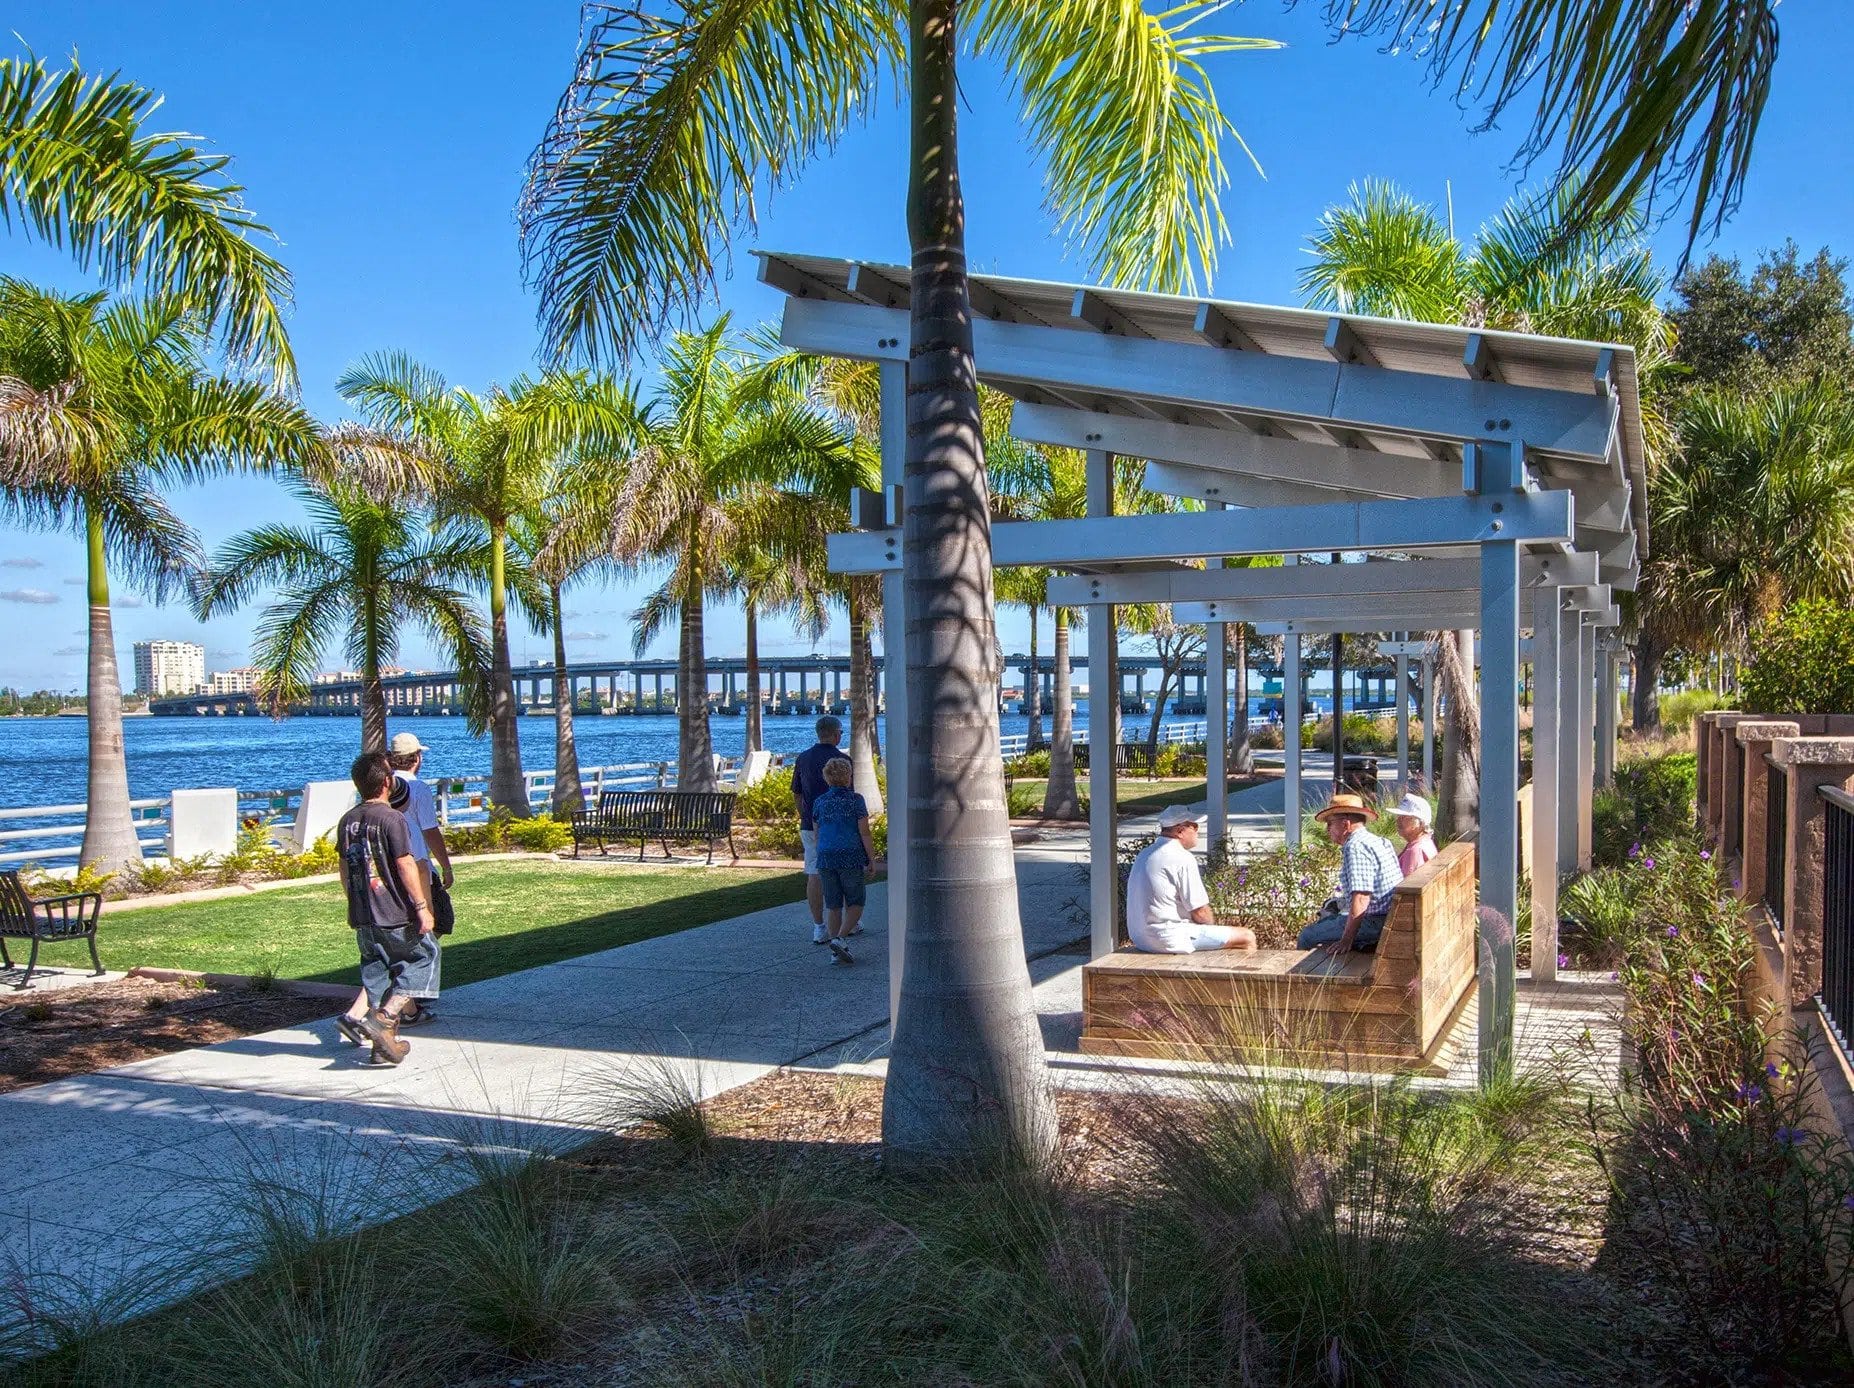 Community Gathering and Leisure Time at Bradenton Park, Surrounded by Palm Trees - Enjoy the Outdoors in Bradenton, F